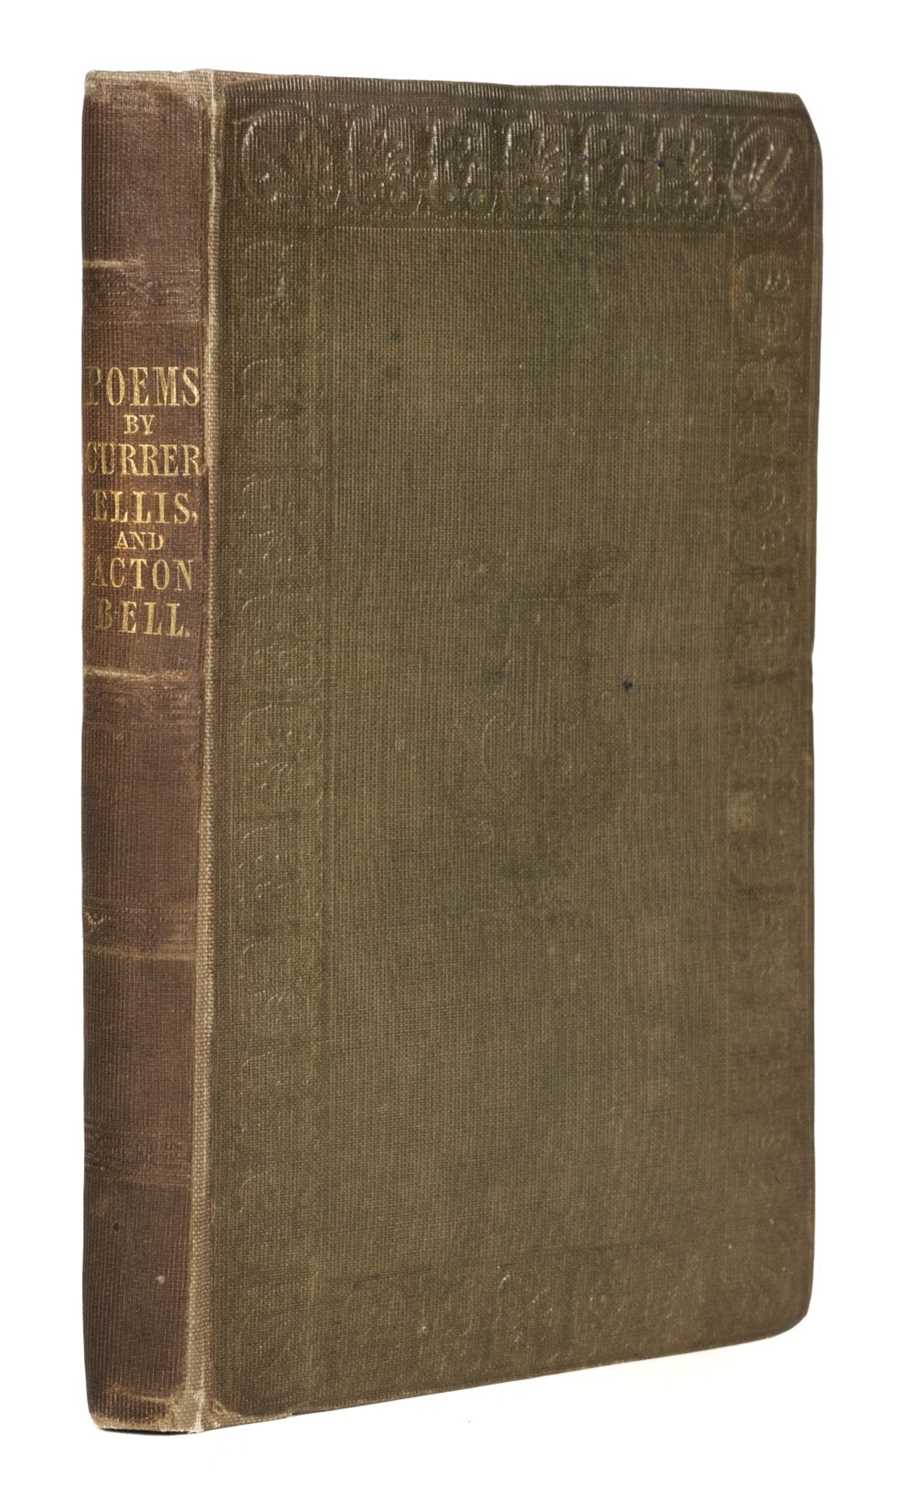 Lot 492 - Bronte (Charlotte, Emily & Anne). Poems by Currer, Ellis and Acton Bell, 1846